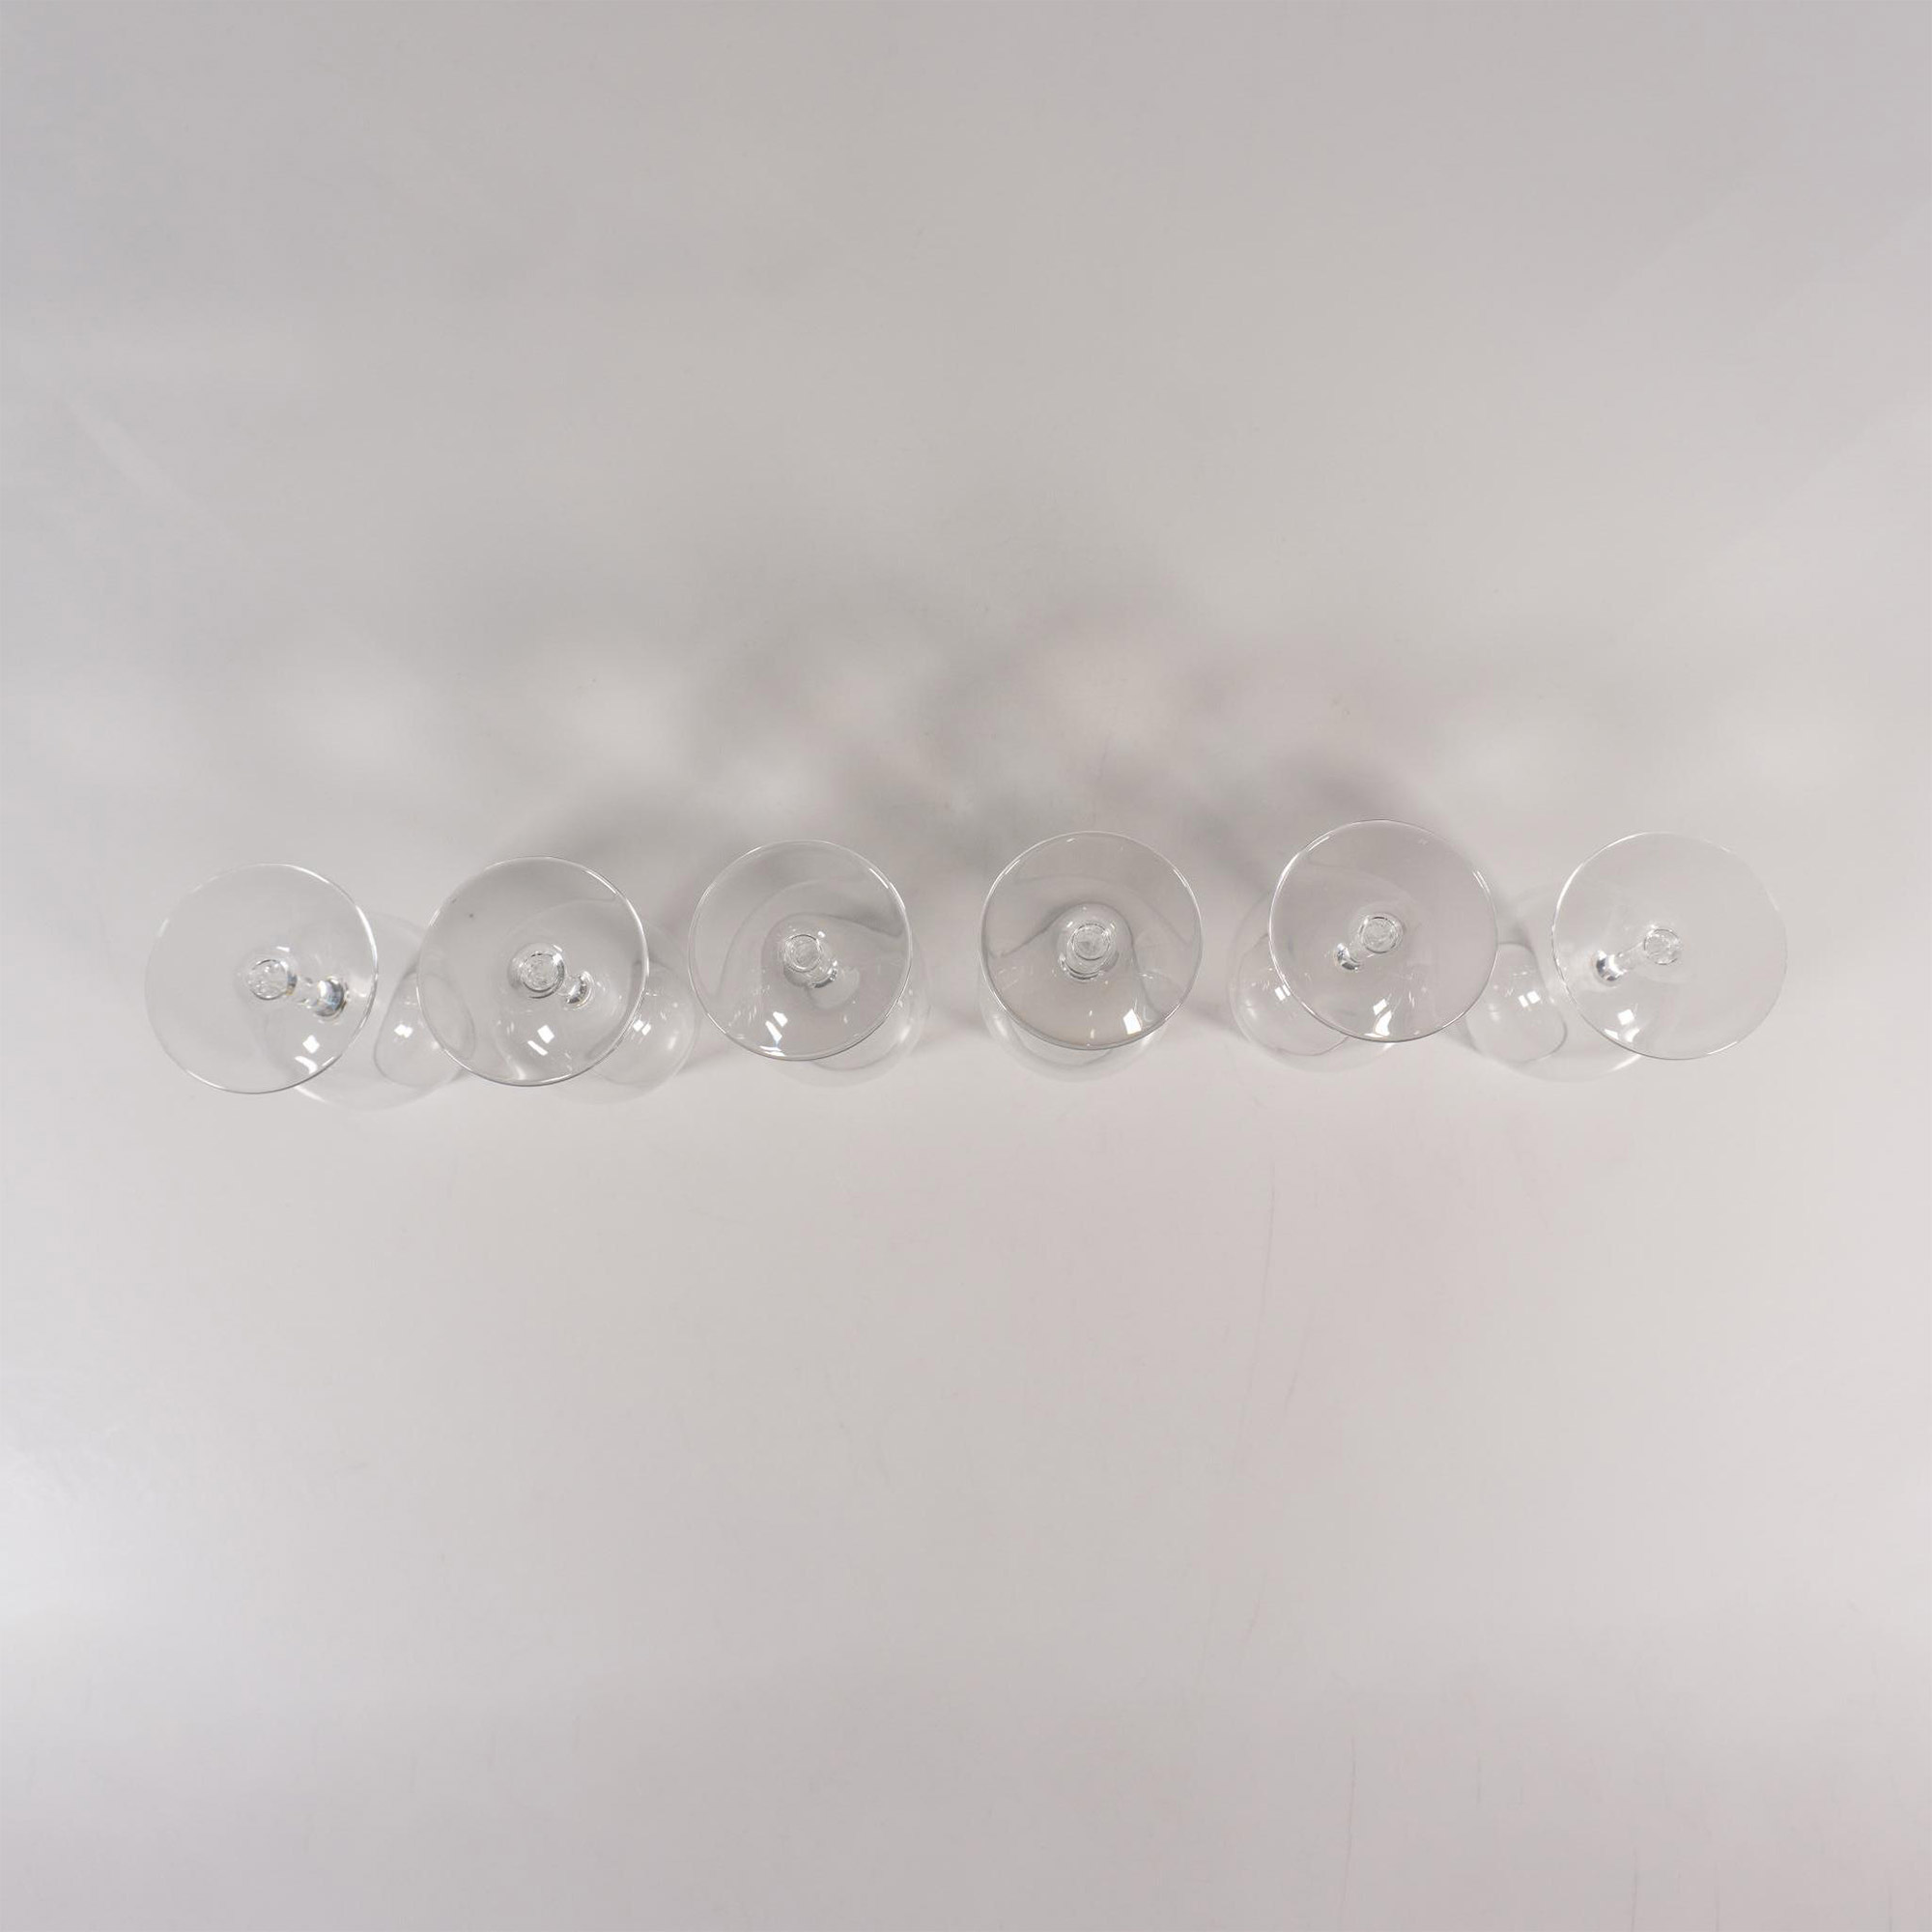 6pc Baccarat Cordial Glasses - Image 2 of 2